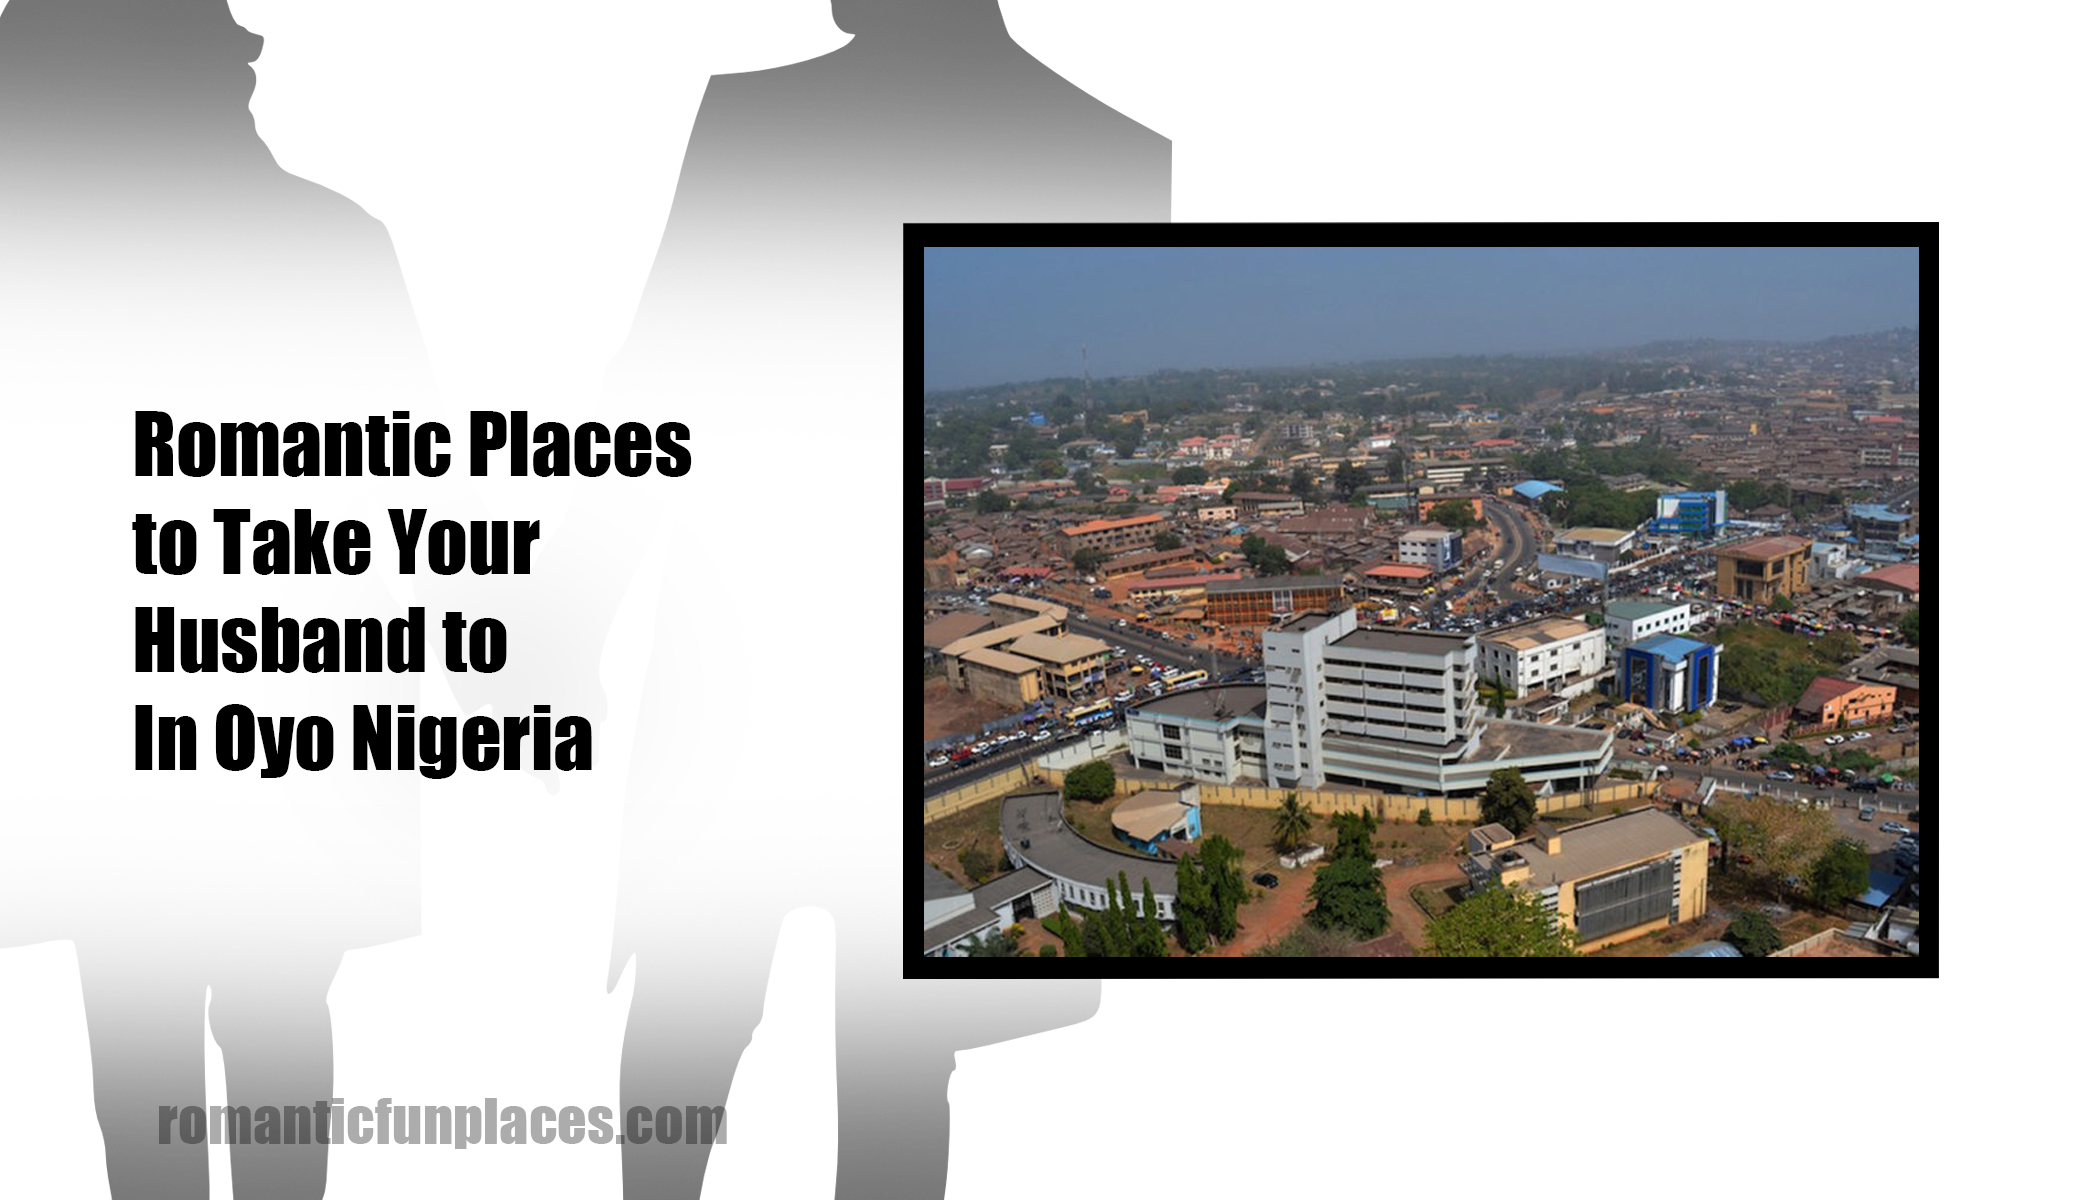 Romantic Places to Take Your Husband to In Oyo Nigeria